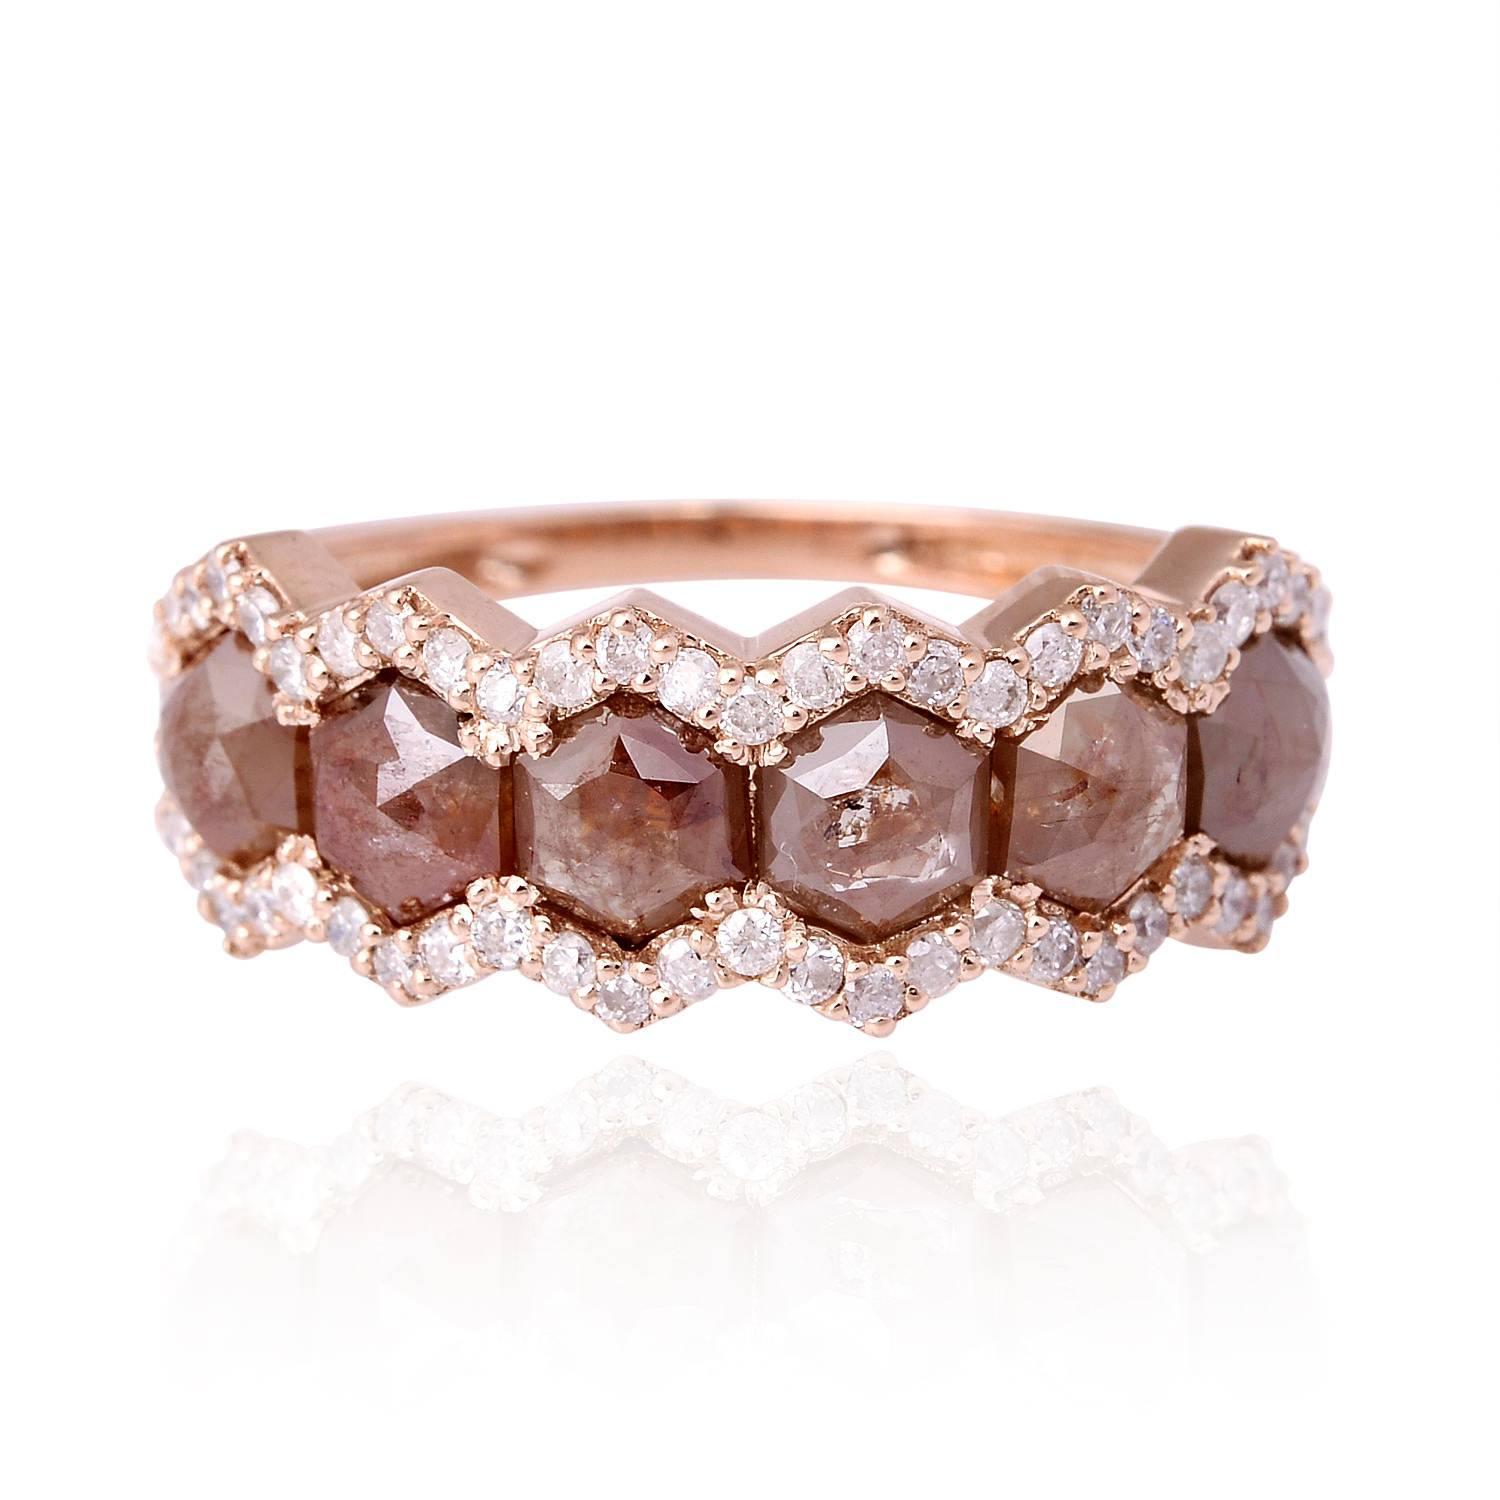 Everyday wearable this zigzag Ice Diamond 18K Rose Gold ring is stunning piece with octagon Ice diamond with pave diamonds around.
Ring Size: 7  (Can be sized)

18kt:3.65gms
Diamond:2.25cts

